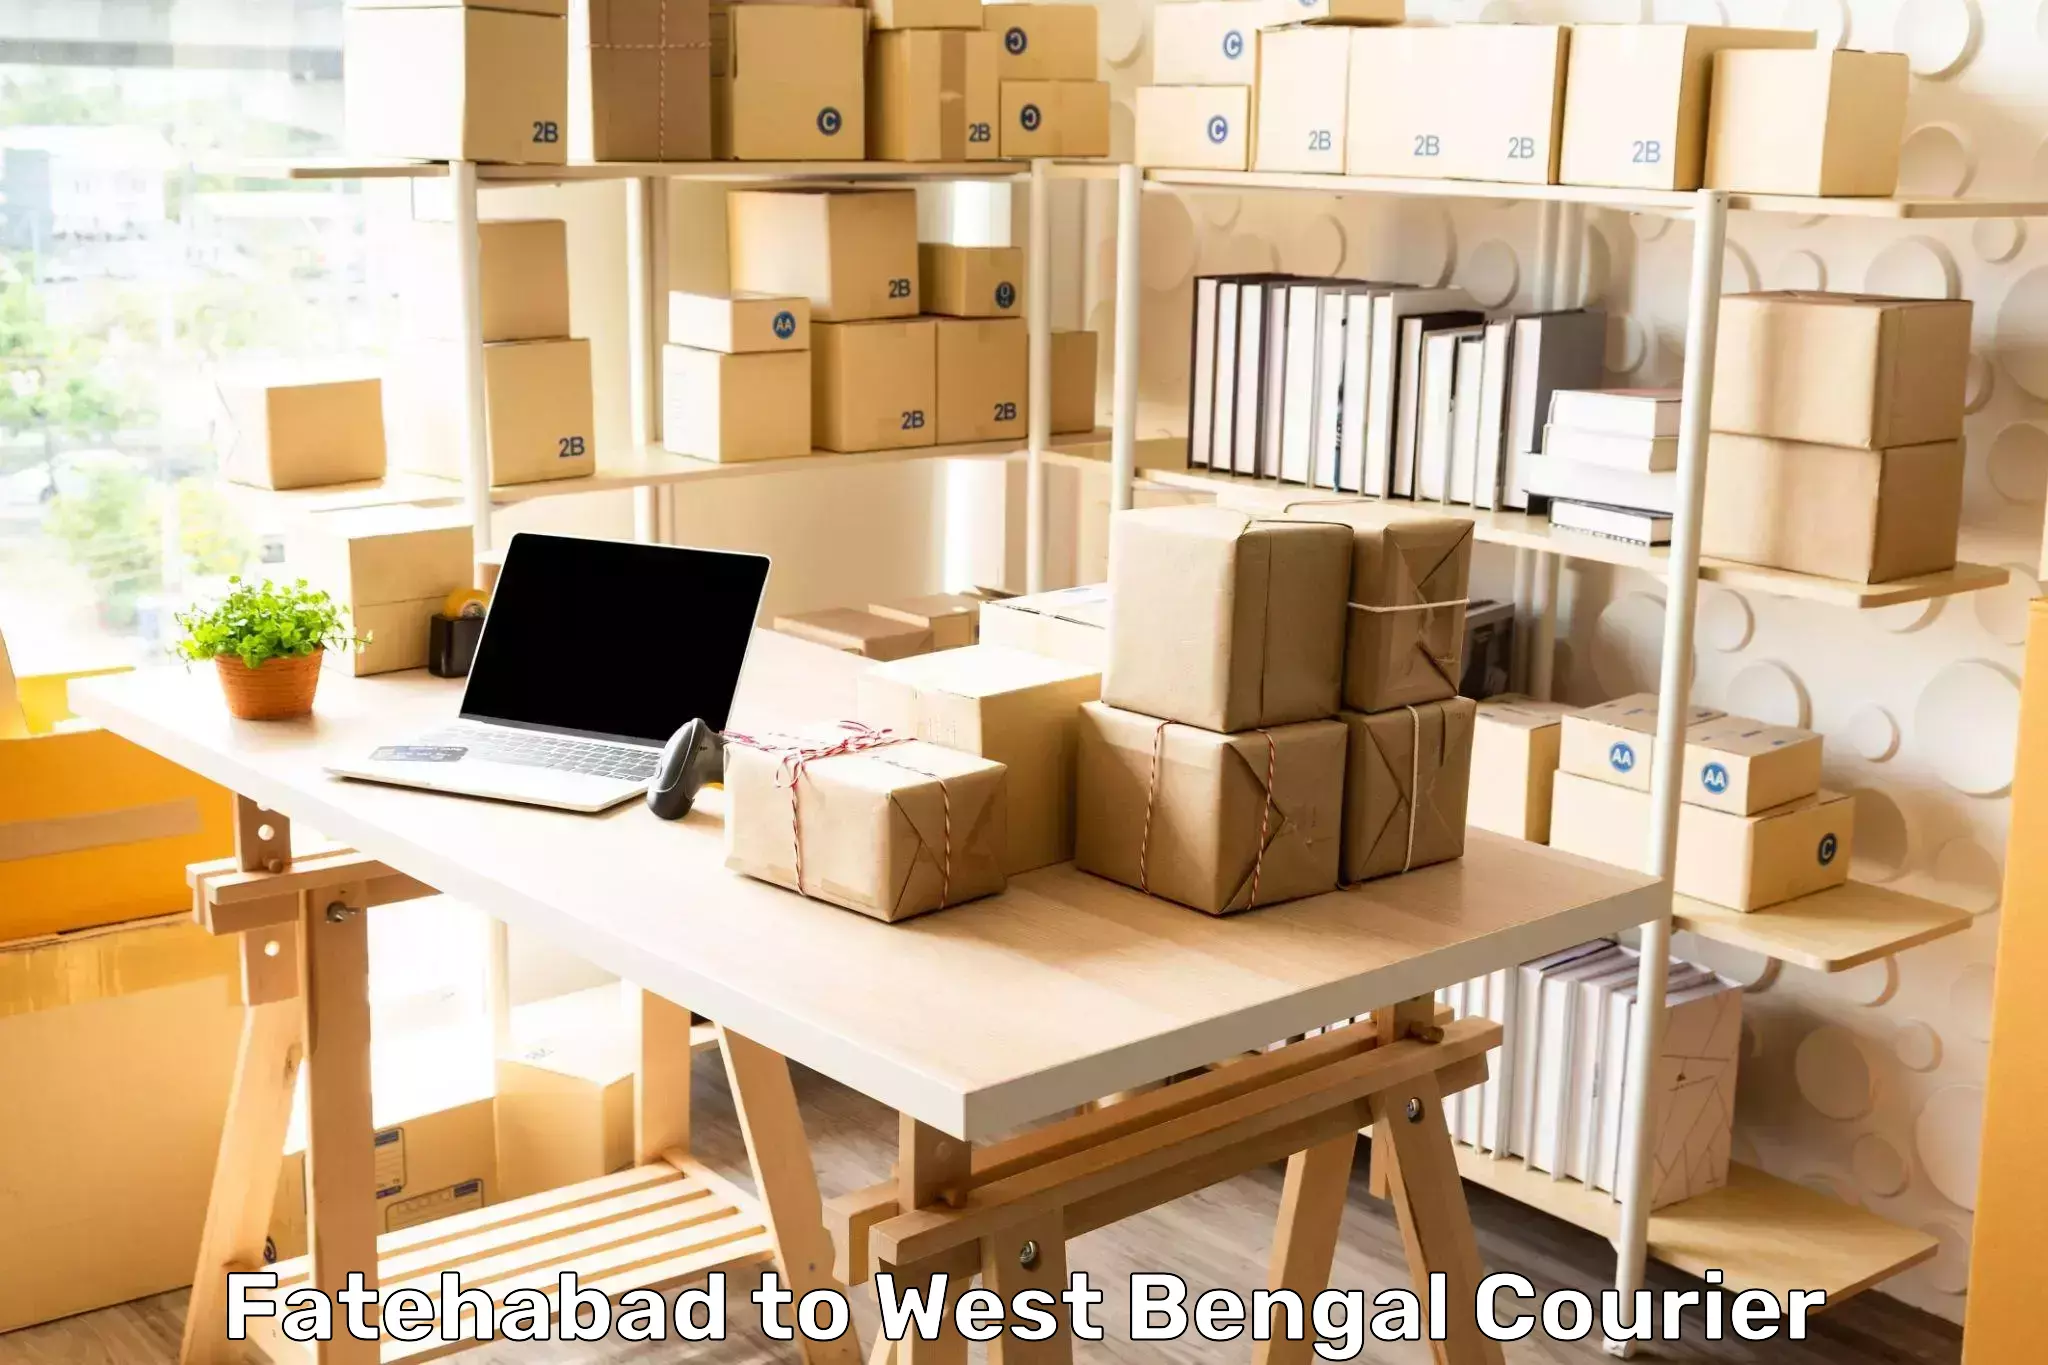 Express package delivery in Fatehabad to West Bengal